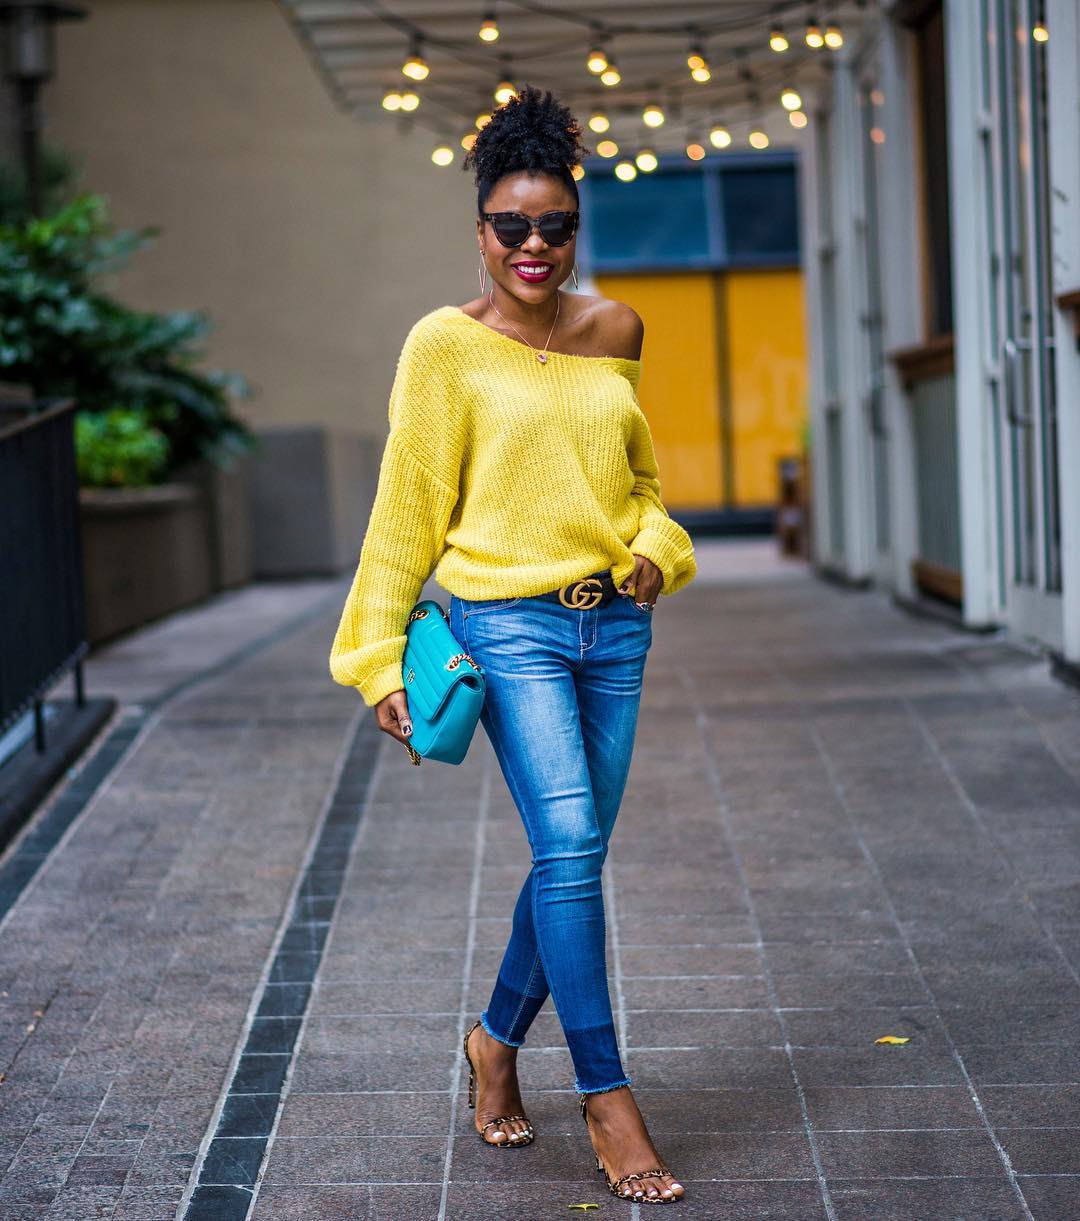 Baby It's Cold Outside: 5 Fun Ways To Wear Sweaters x Pants This Season